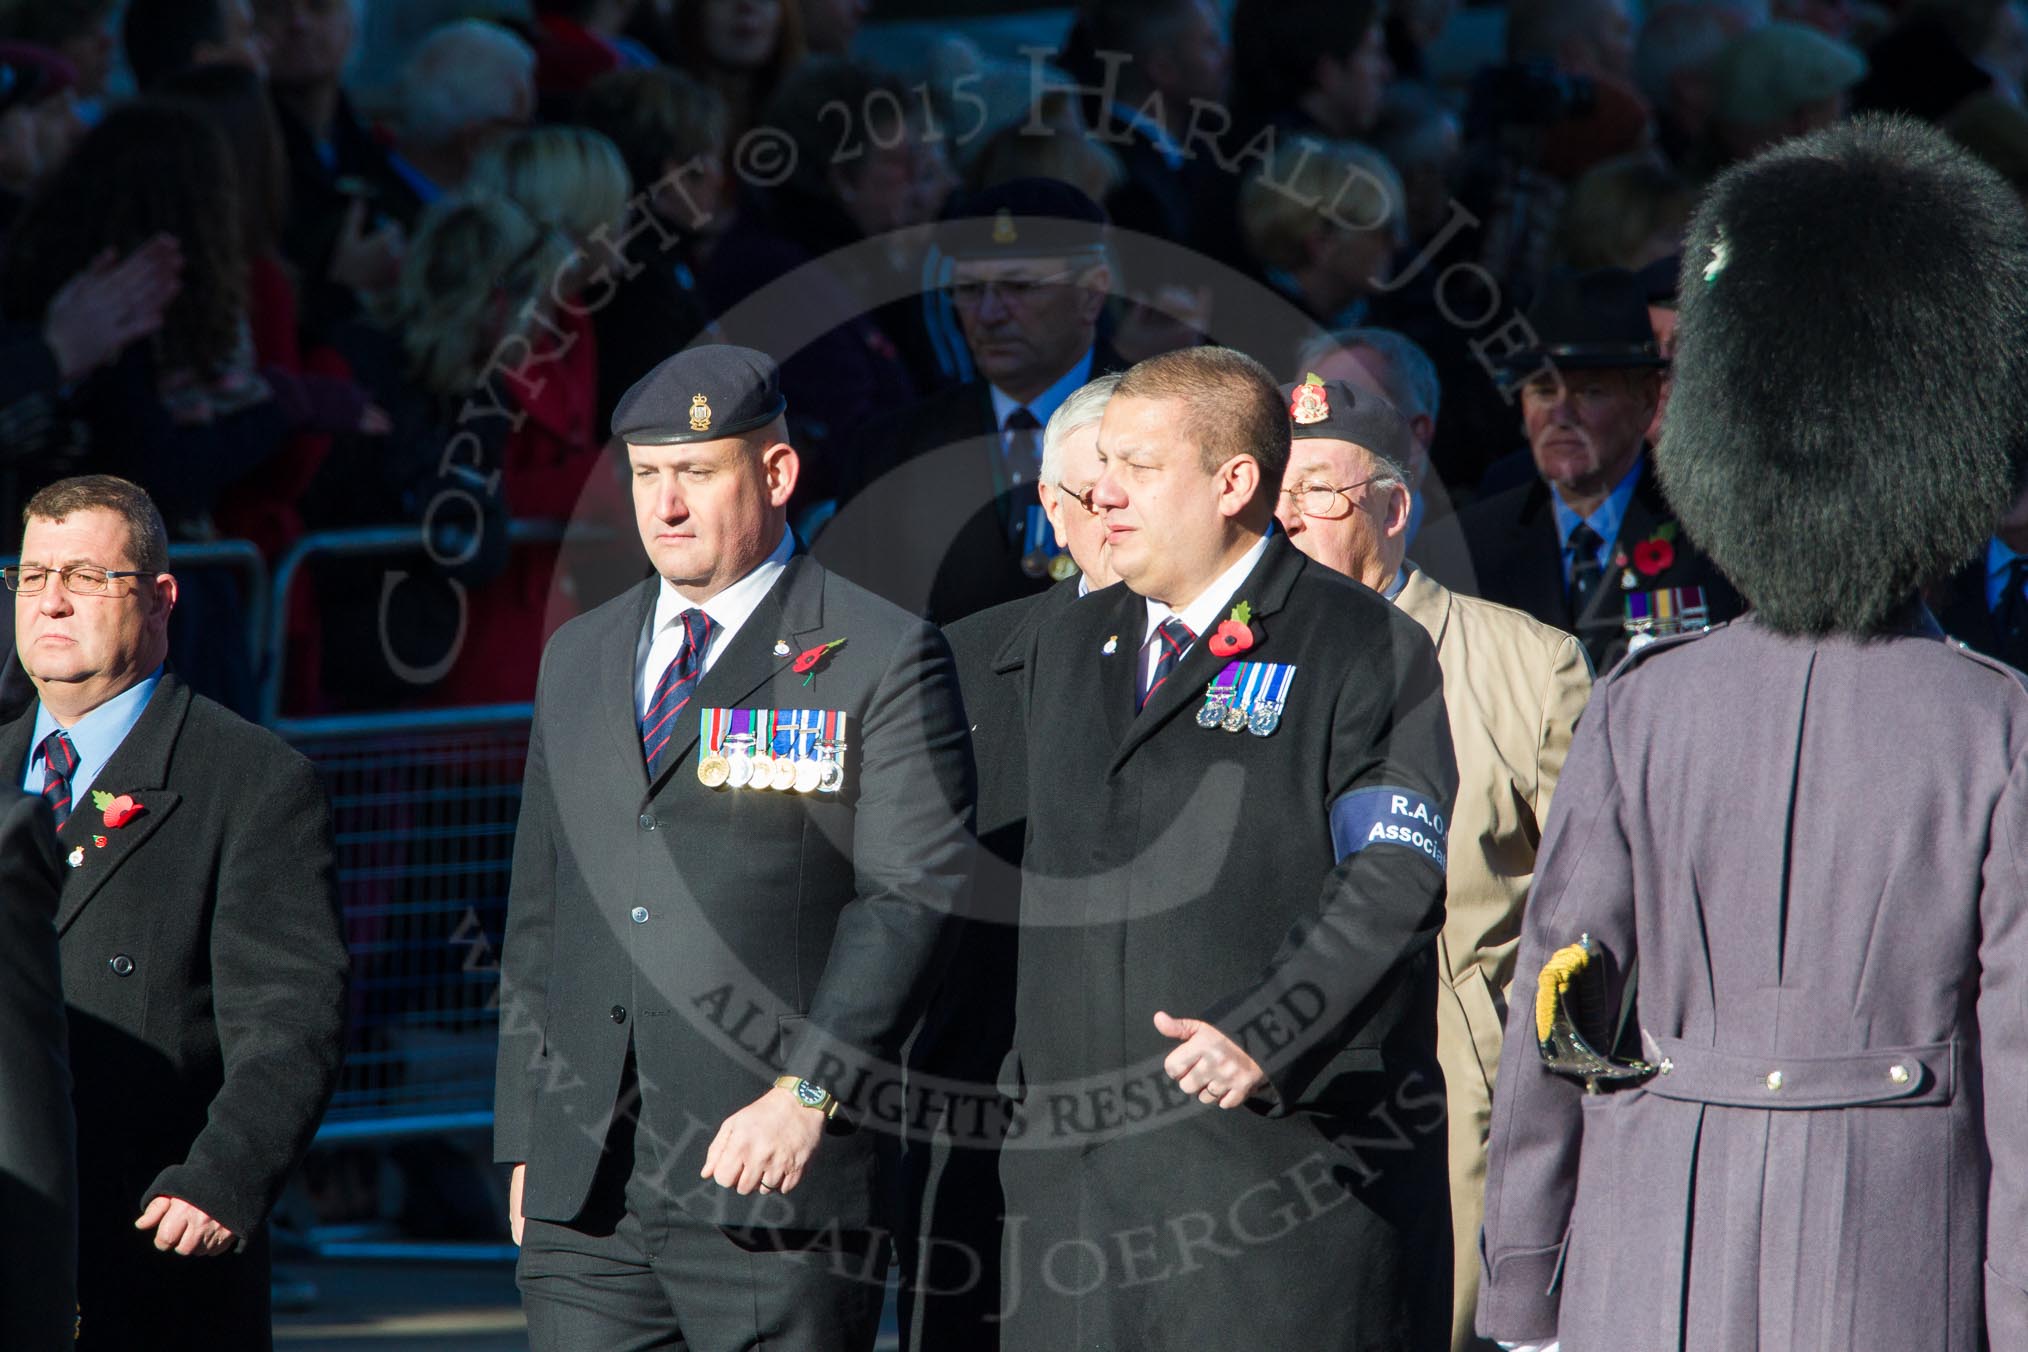 Remembrance Sunday Cenotaph March Past 2013: B27 - RAOC Association..
Press stand opposite the Foreign Office building, Whitehall, London SW1,
London,
Greater London,
United Kingdom,
on 10 November 2013 at 12:03, image #1534